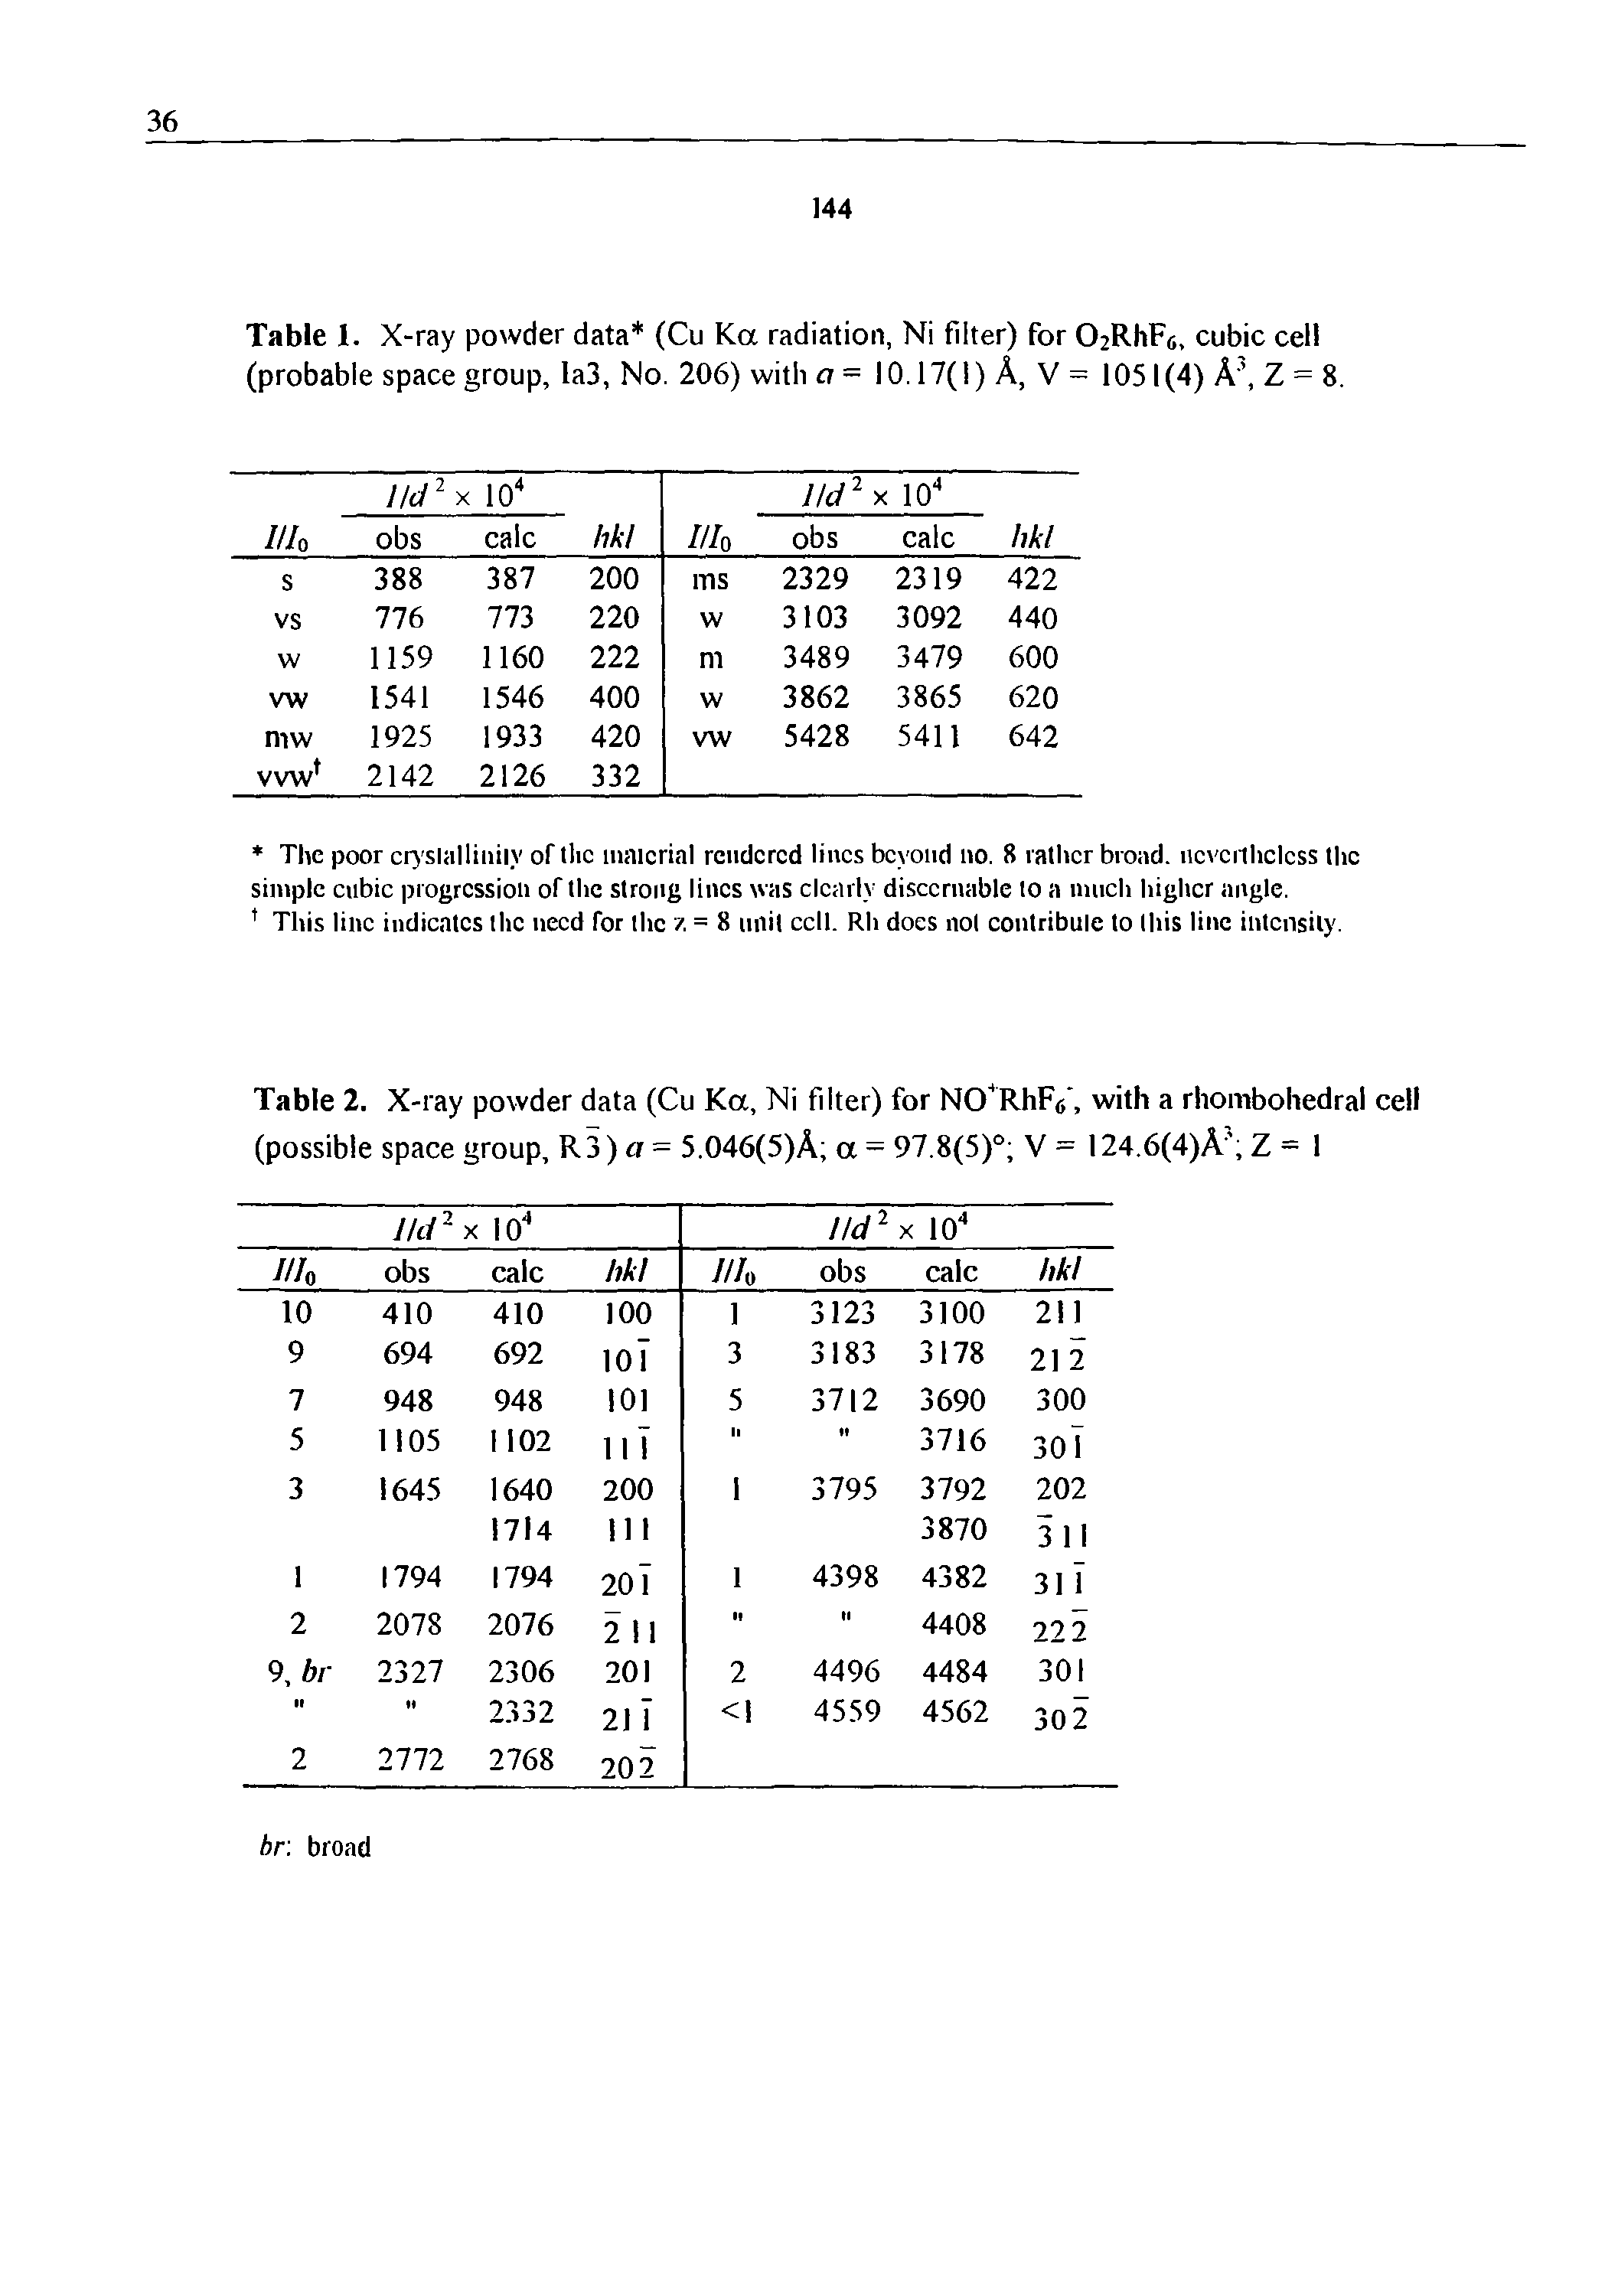 Table 1. X-ray powder data (Cu Ka radiation, Ni filter) for 02Rhp6, cubic cell (probable space group, la3, No. 206) with a= 10.17(1) A, V = 1051(4) A , Z = 8.